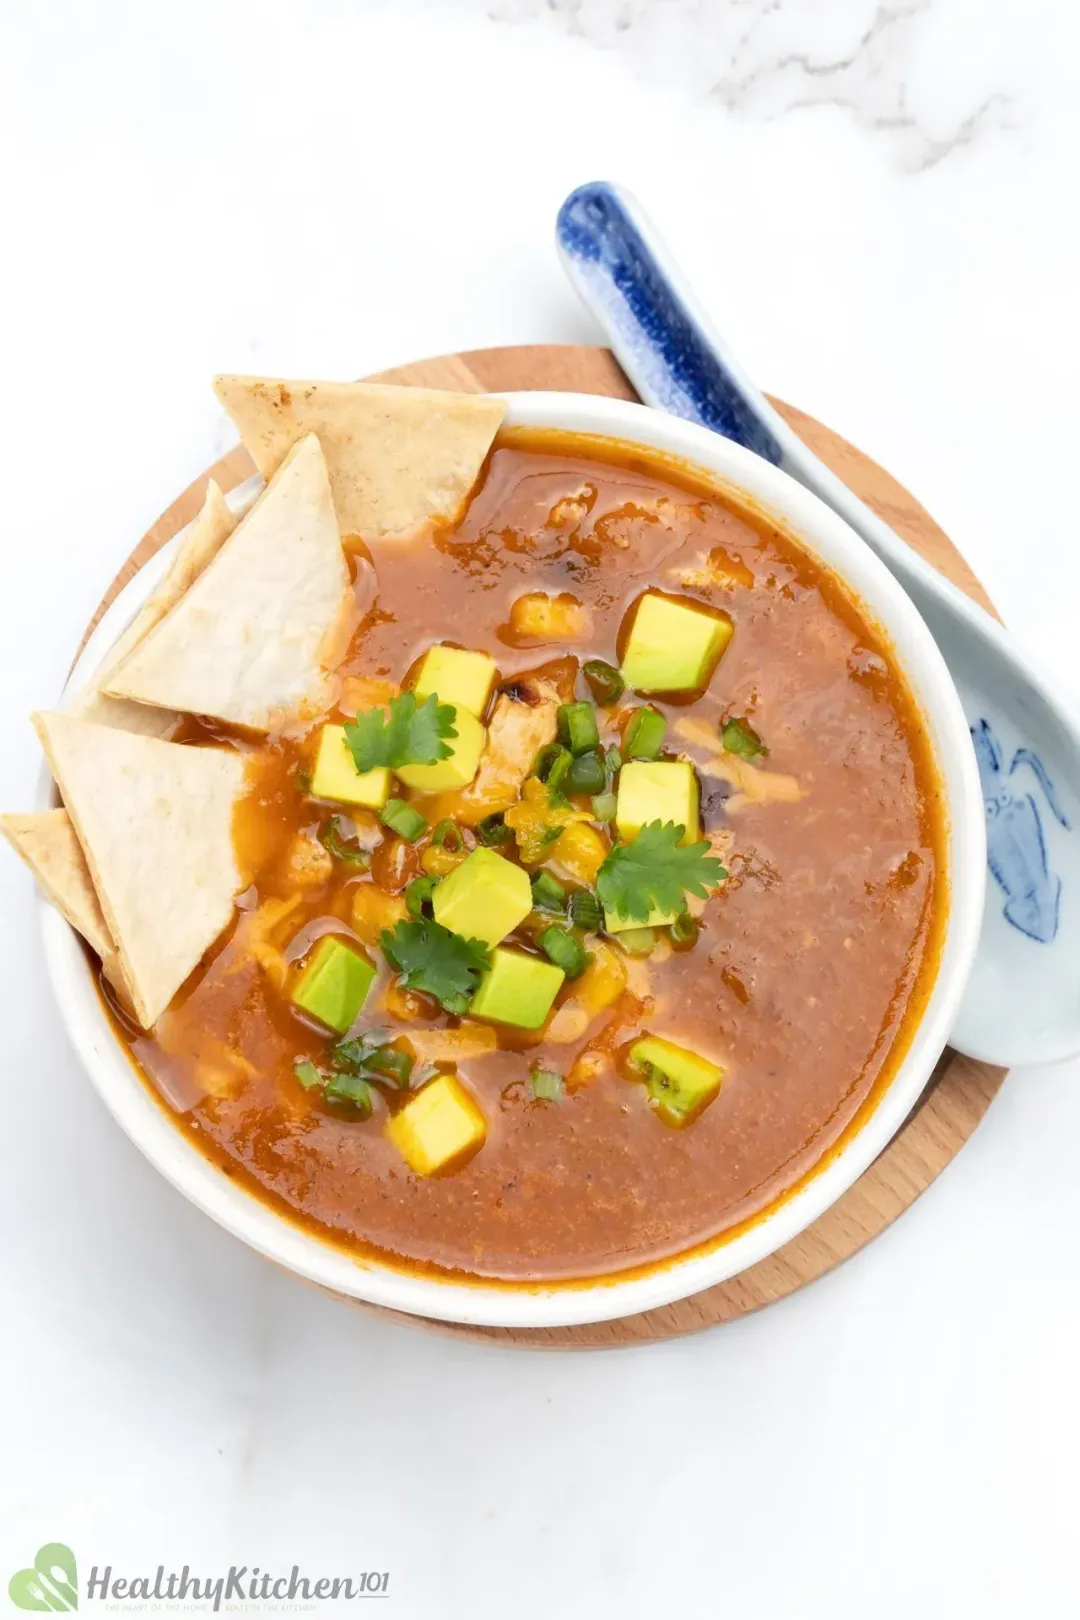 A bowl of chicken tortilla soup placed on a small plate and next to a spoon